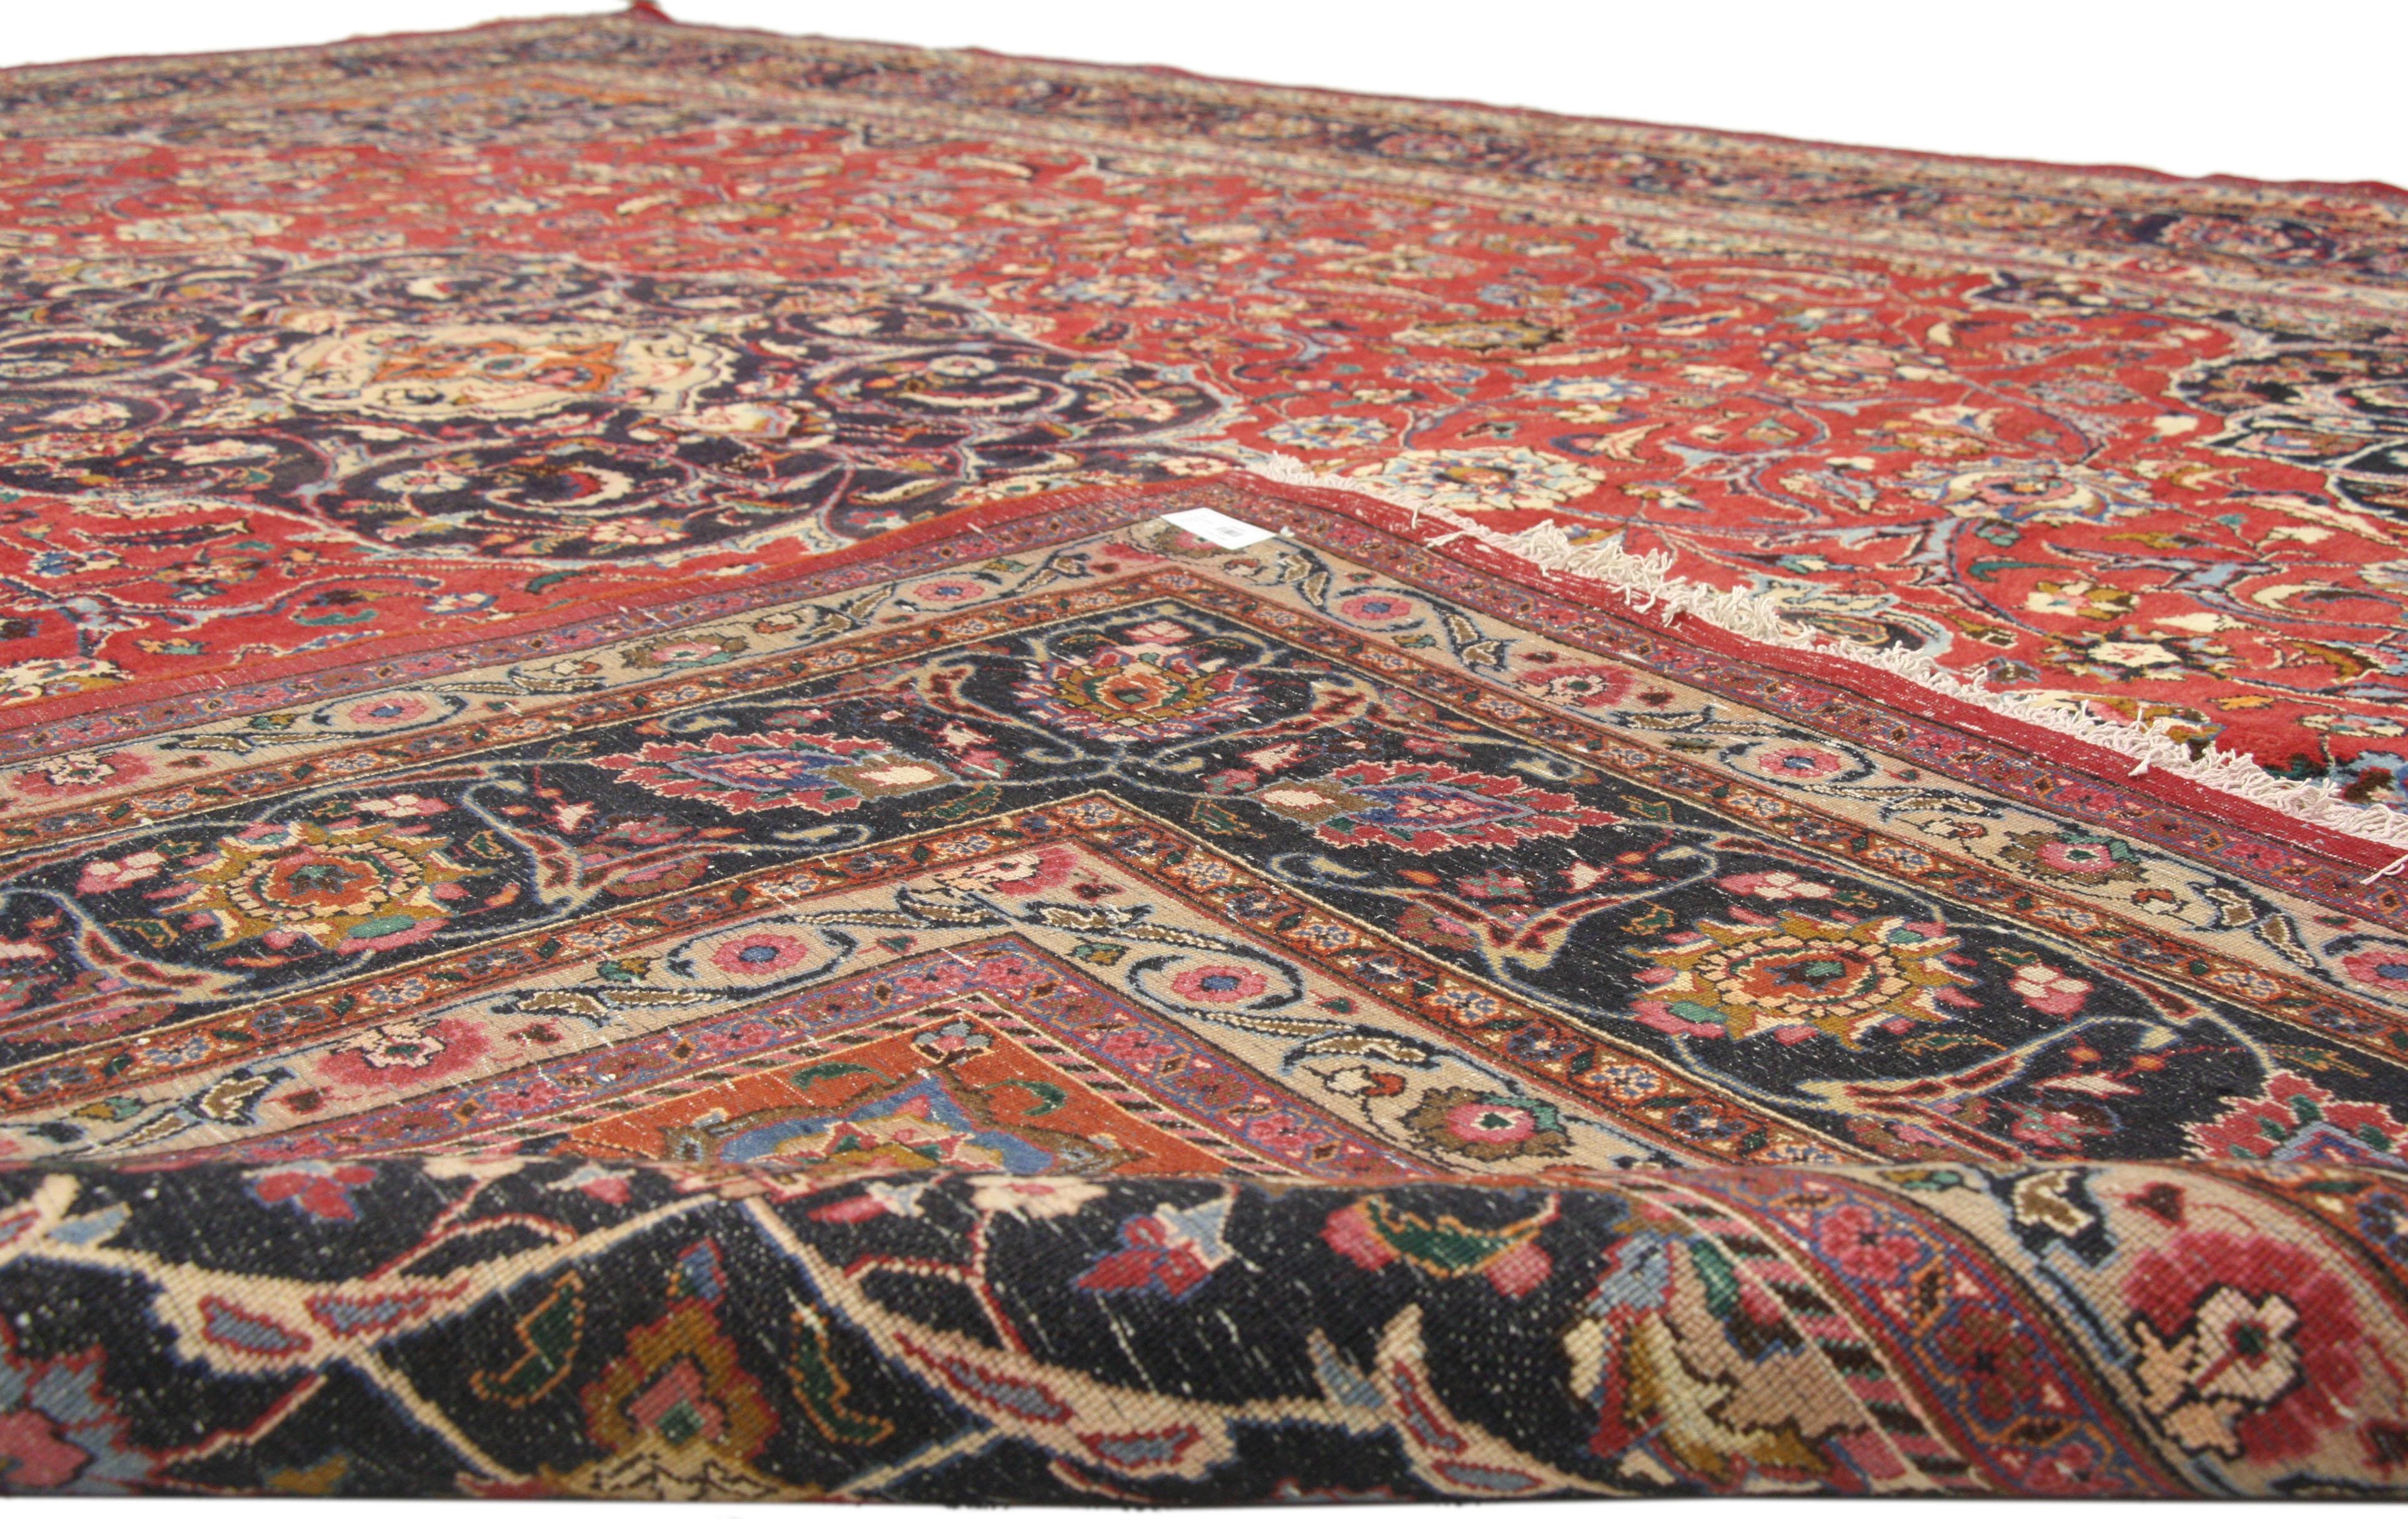 Vintage Persian Mashhad Area Rug with Jacobean Style In Good Condition For Sale In Dallas, TX